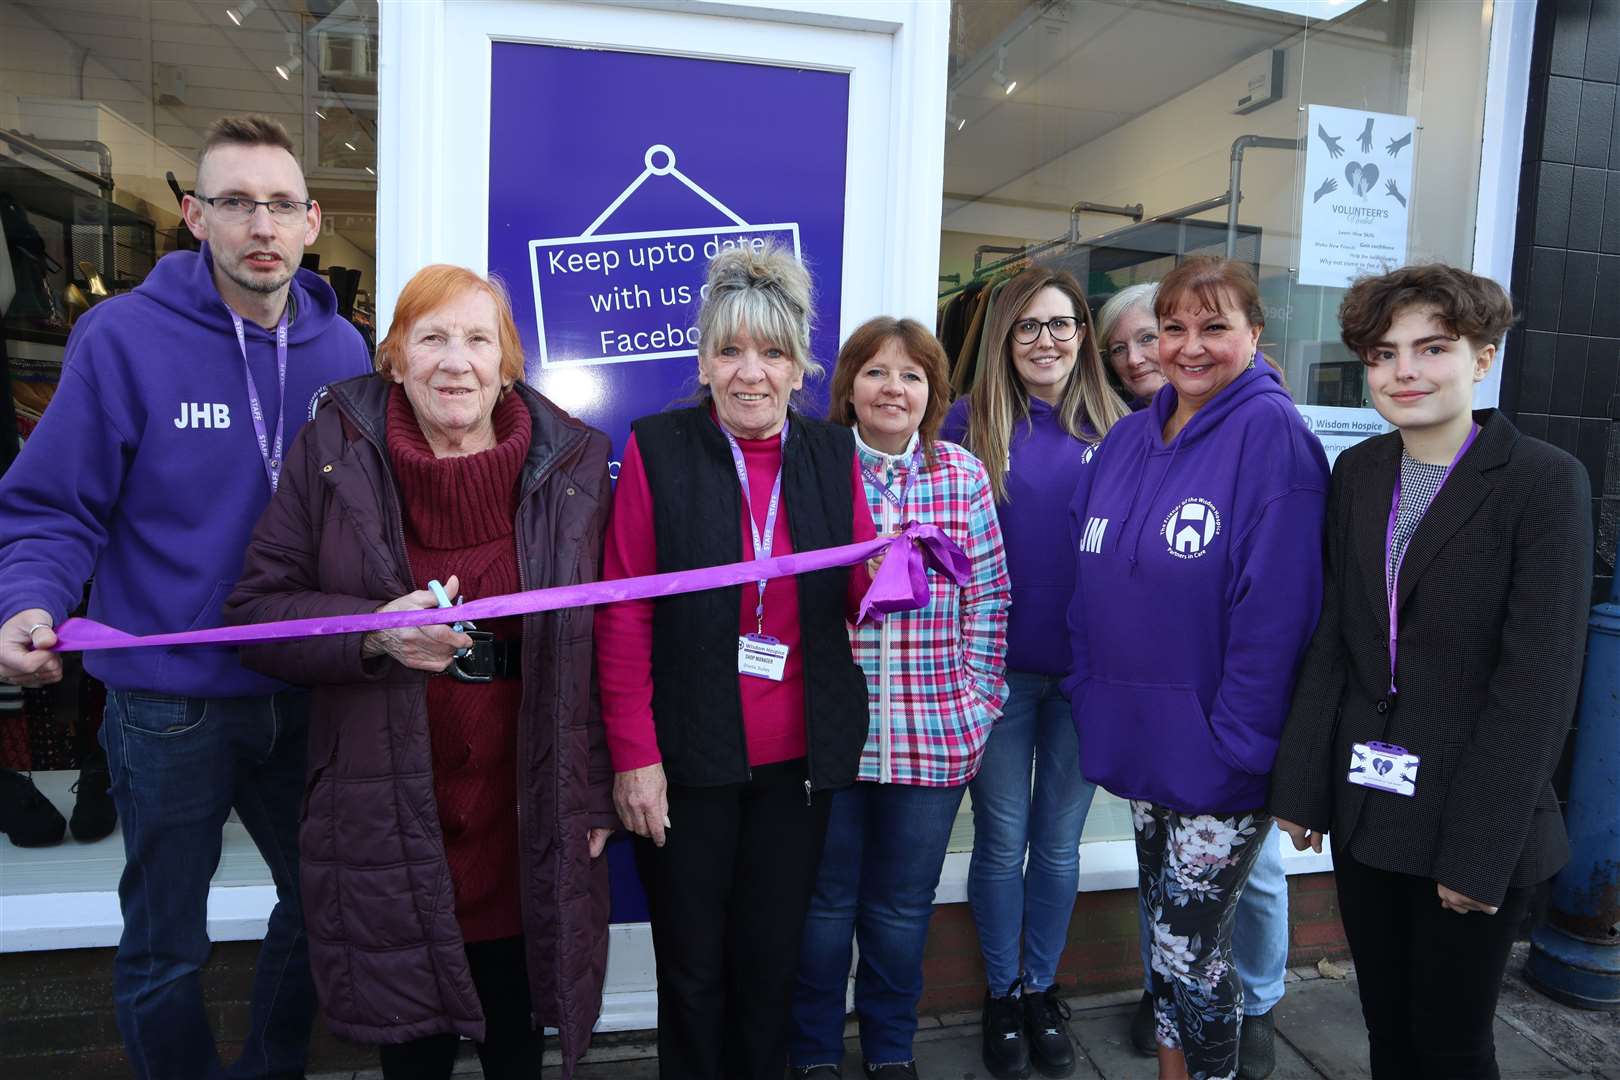 Volunteer Molly Johal, with scissors, joined manager Sheila Sulley and assistant manager Julia Purkins to open the new Wisdom Hospice charity shop in Sheerness High Street. Picture: John Nurden